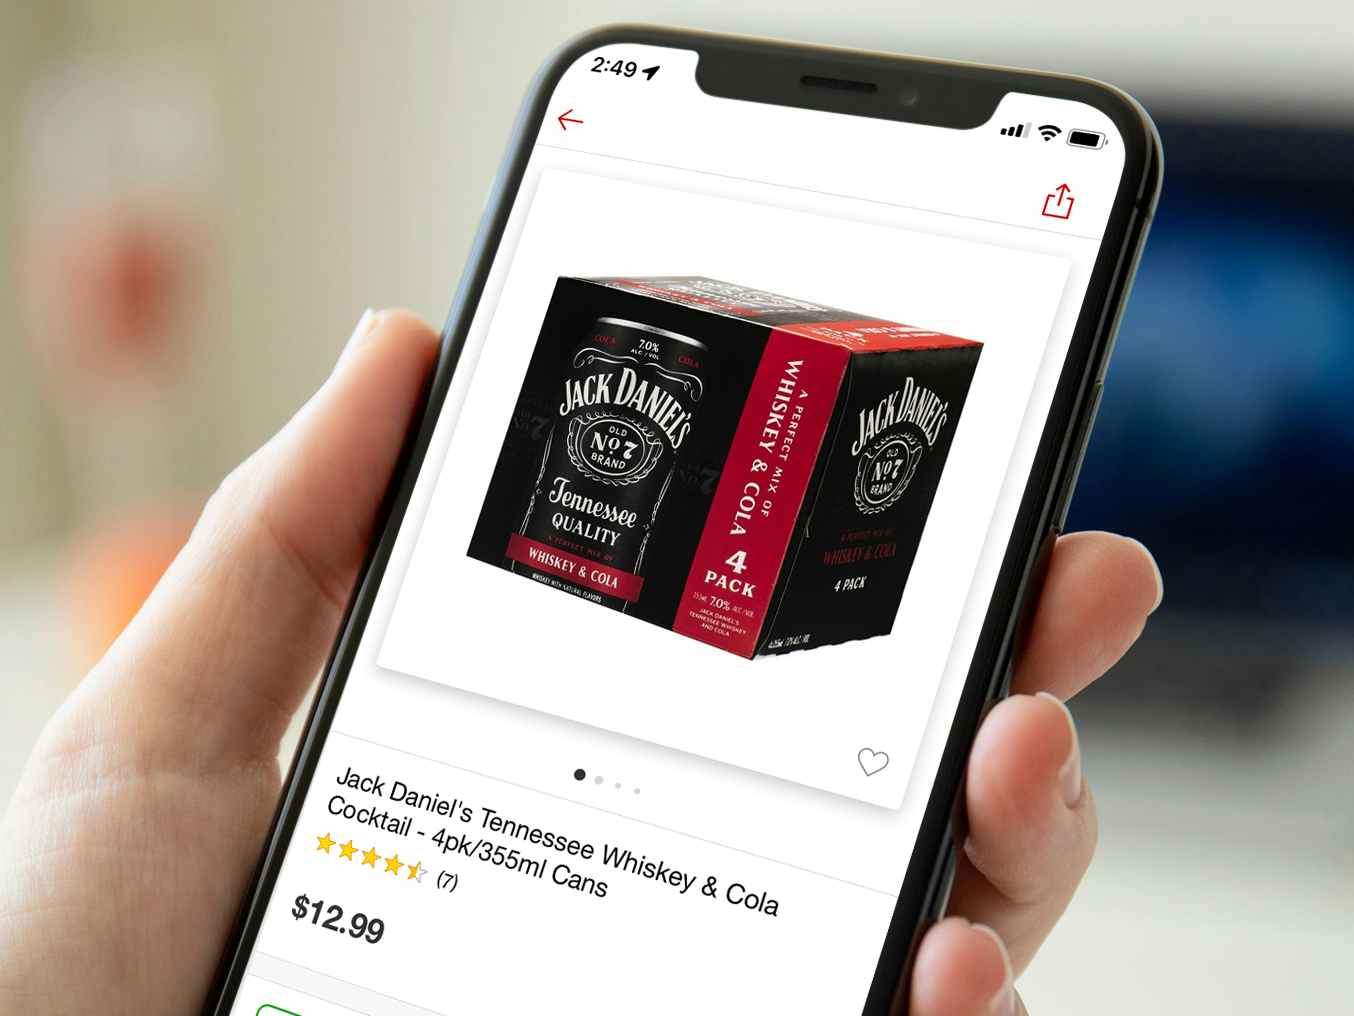 person holding phone with jack daniels coca-cola cans product screenshot